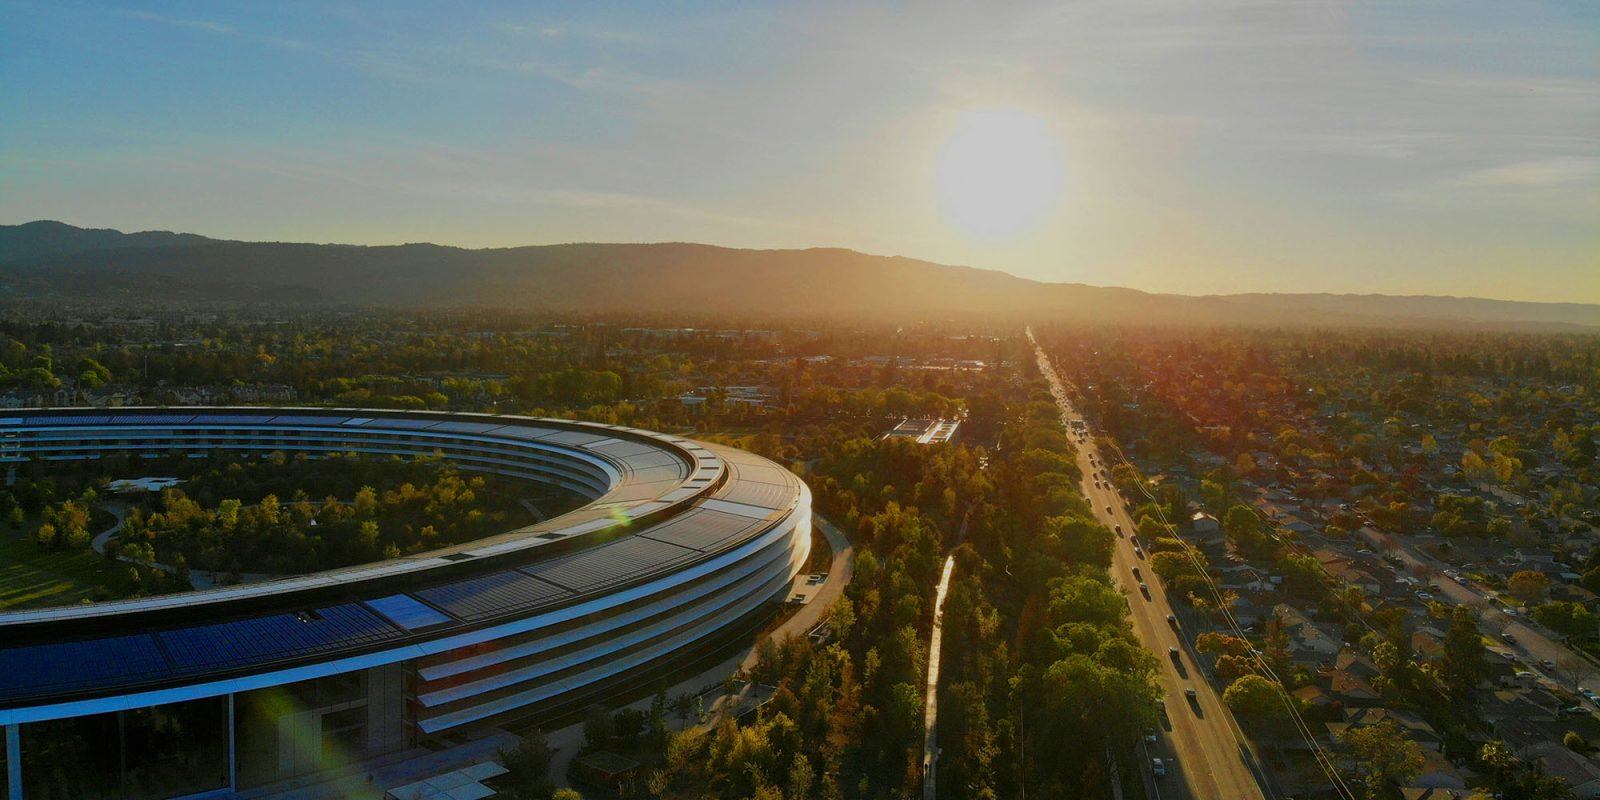 Security researcher used Apple systems to scam $2.5M | Apple Park drone shot